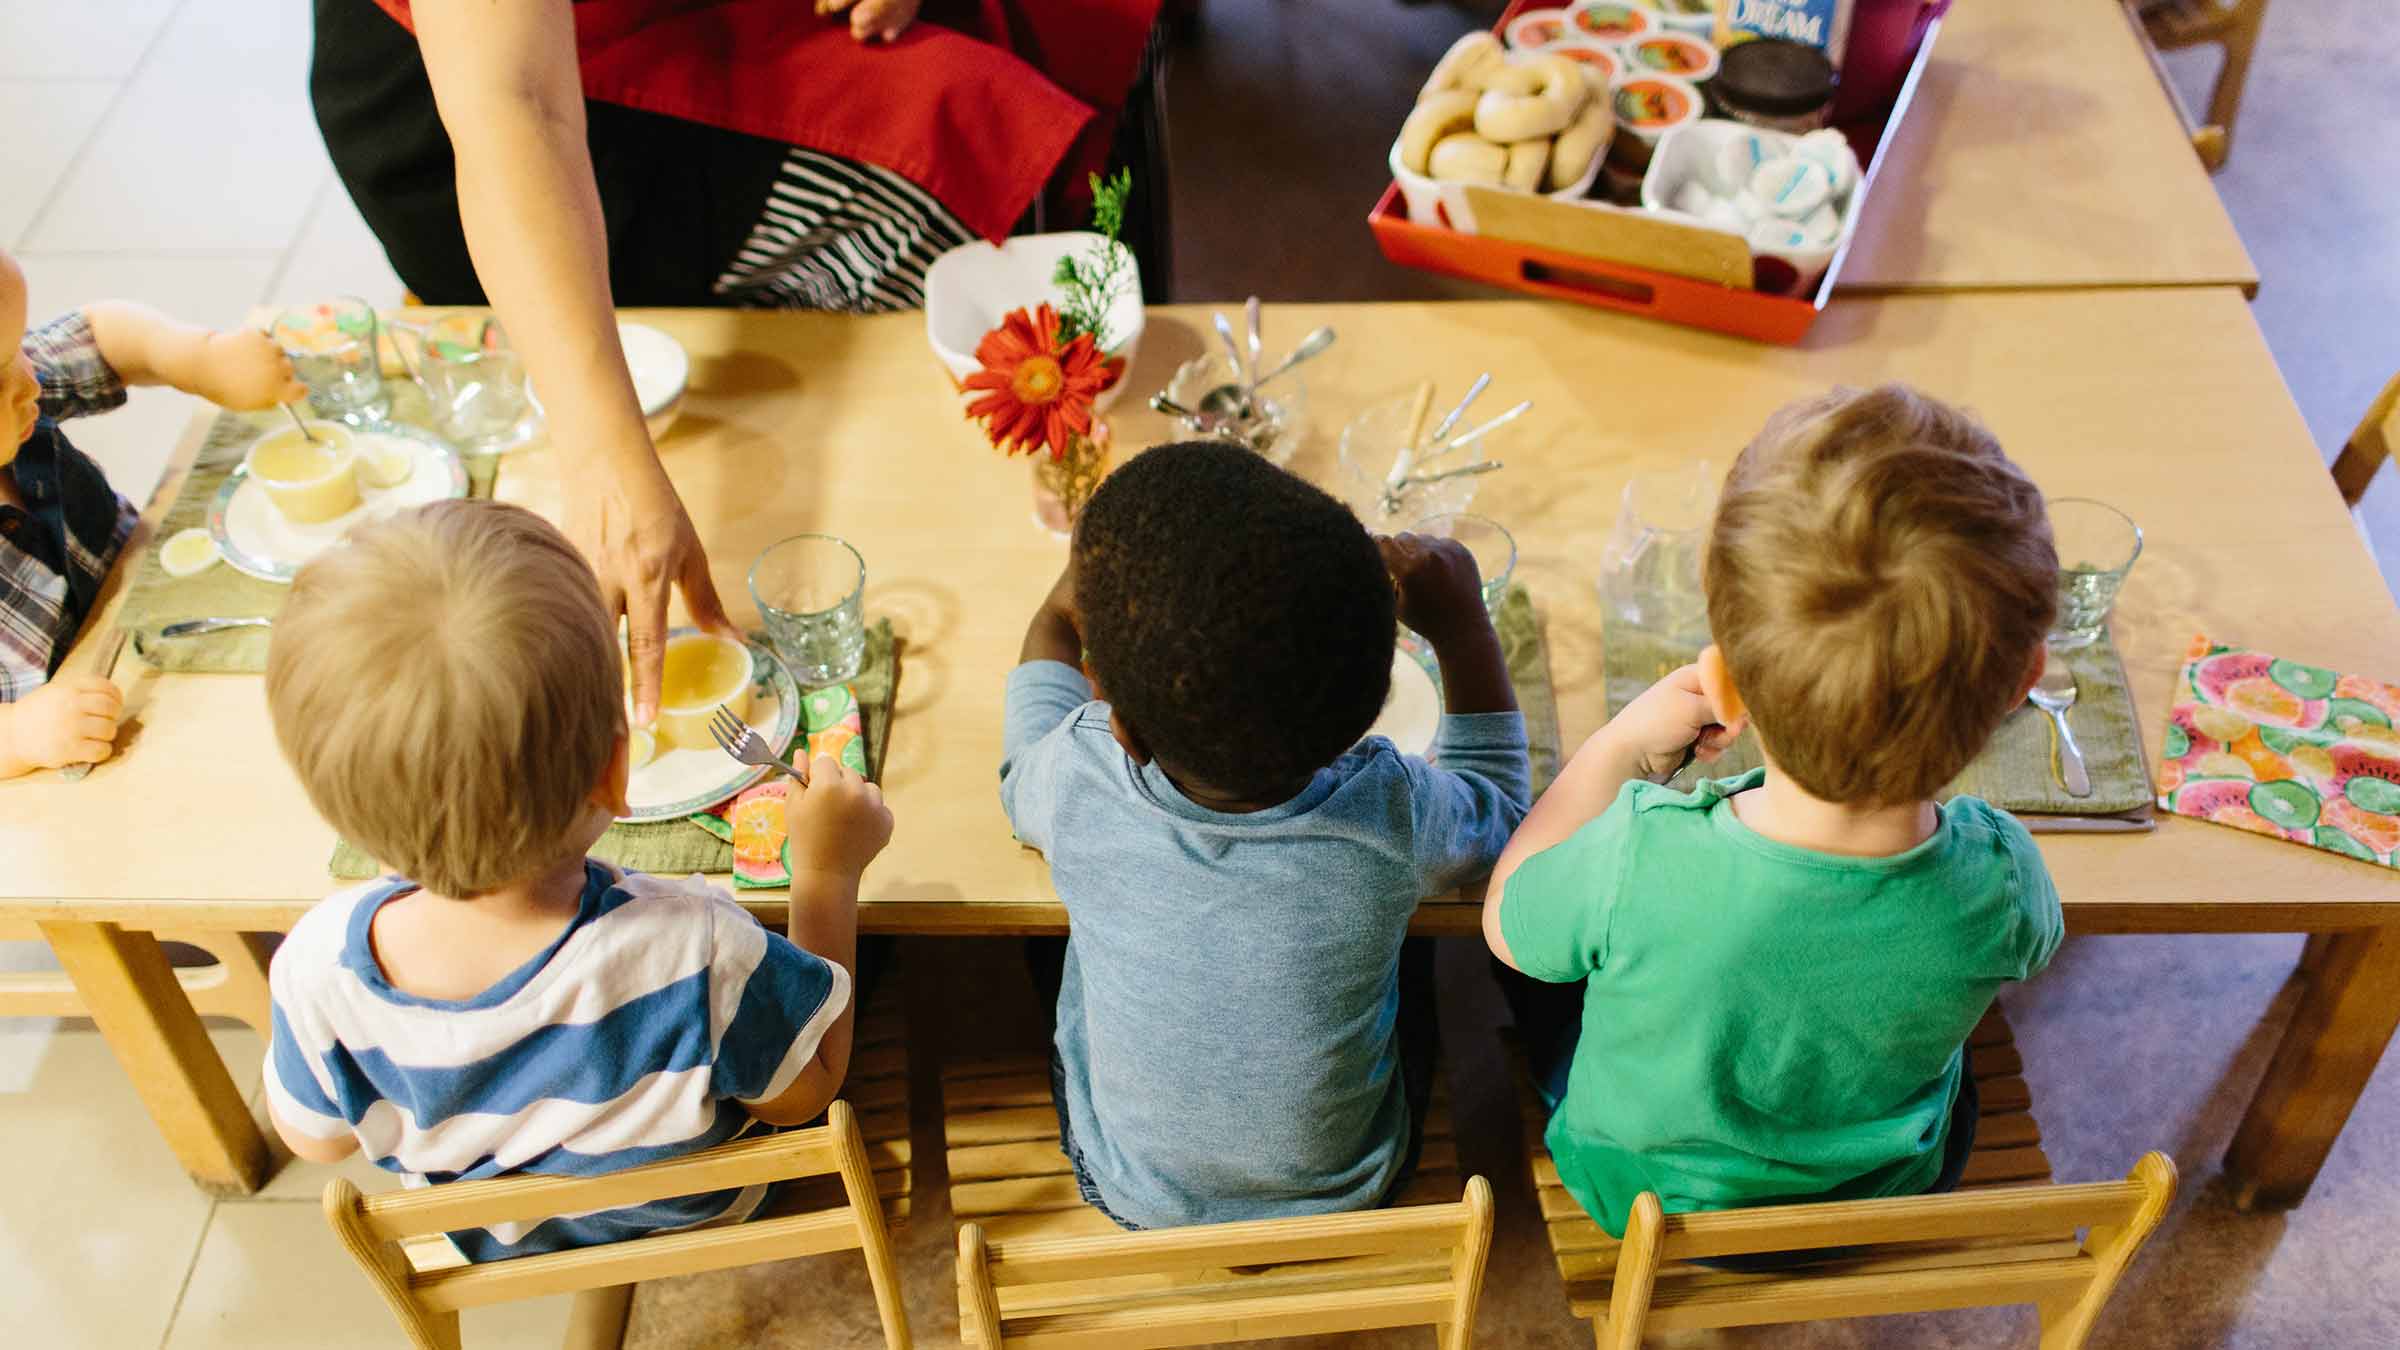 A group of preschoolers sit at a table together while their teacher hands out their snack